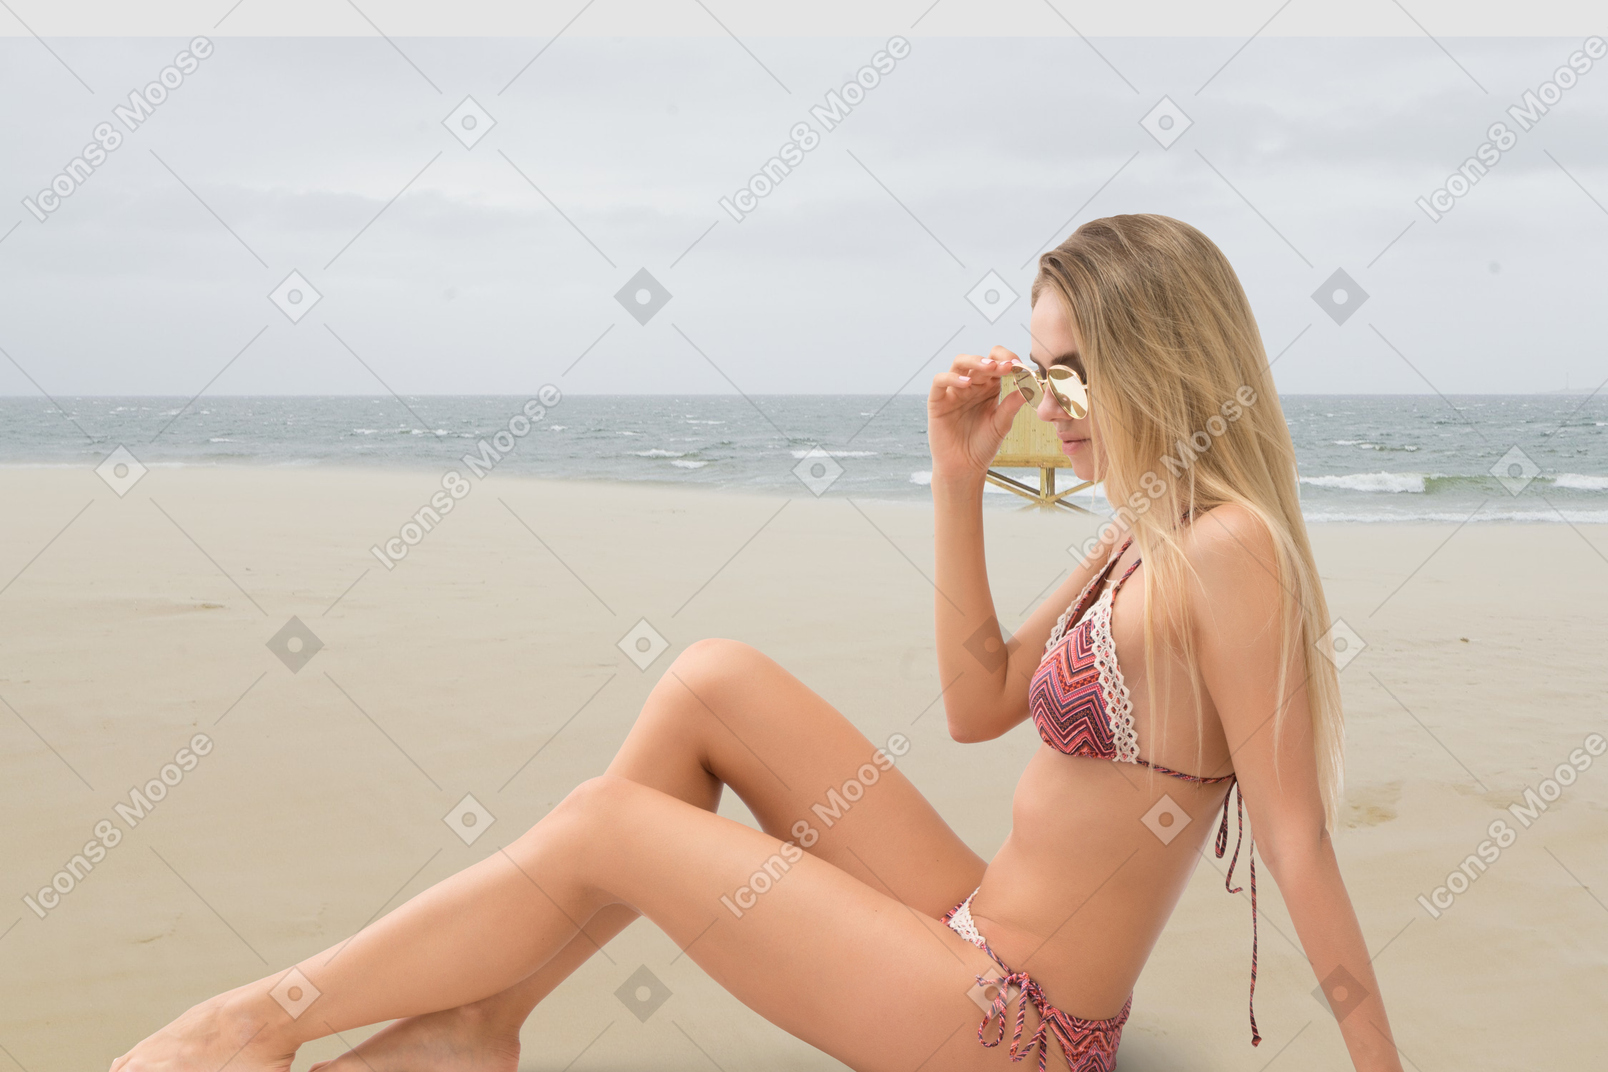 Young woman holding a pineapple on the beach